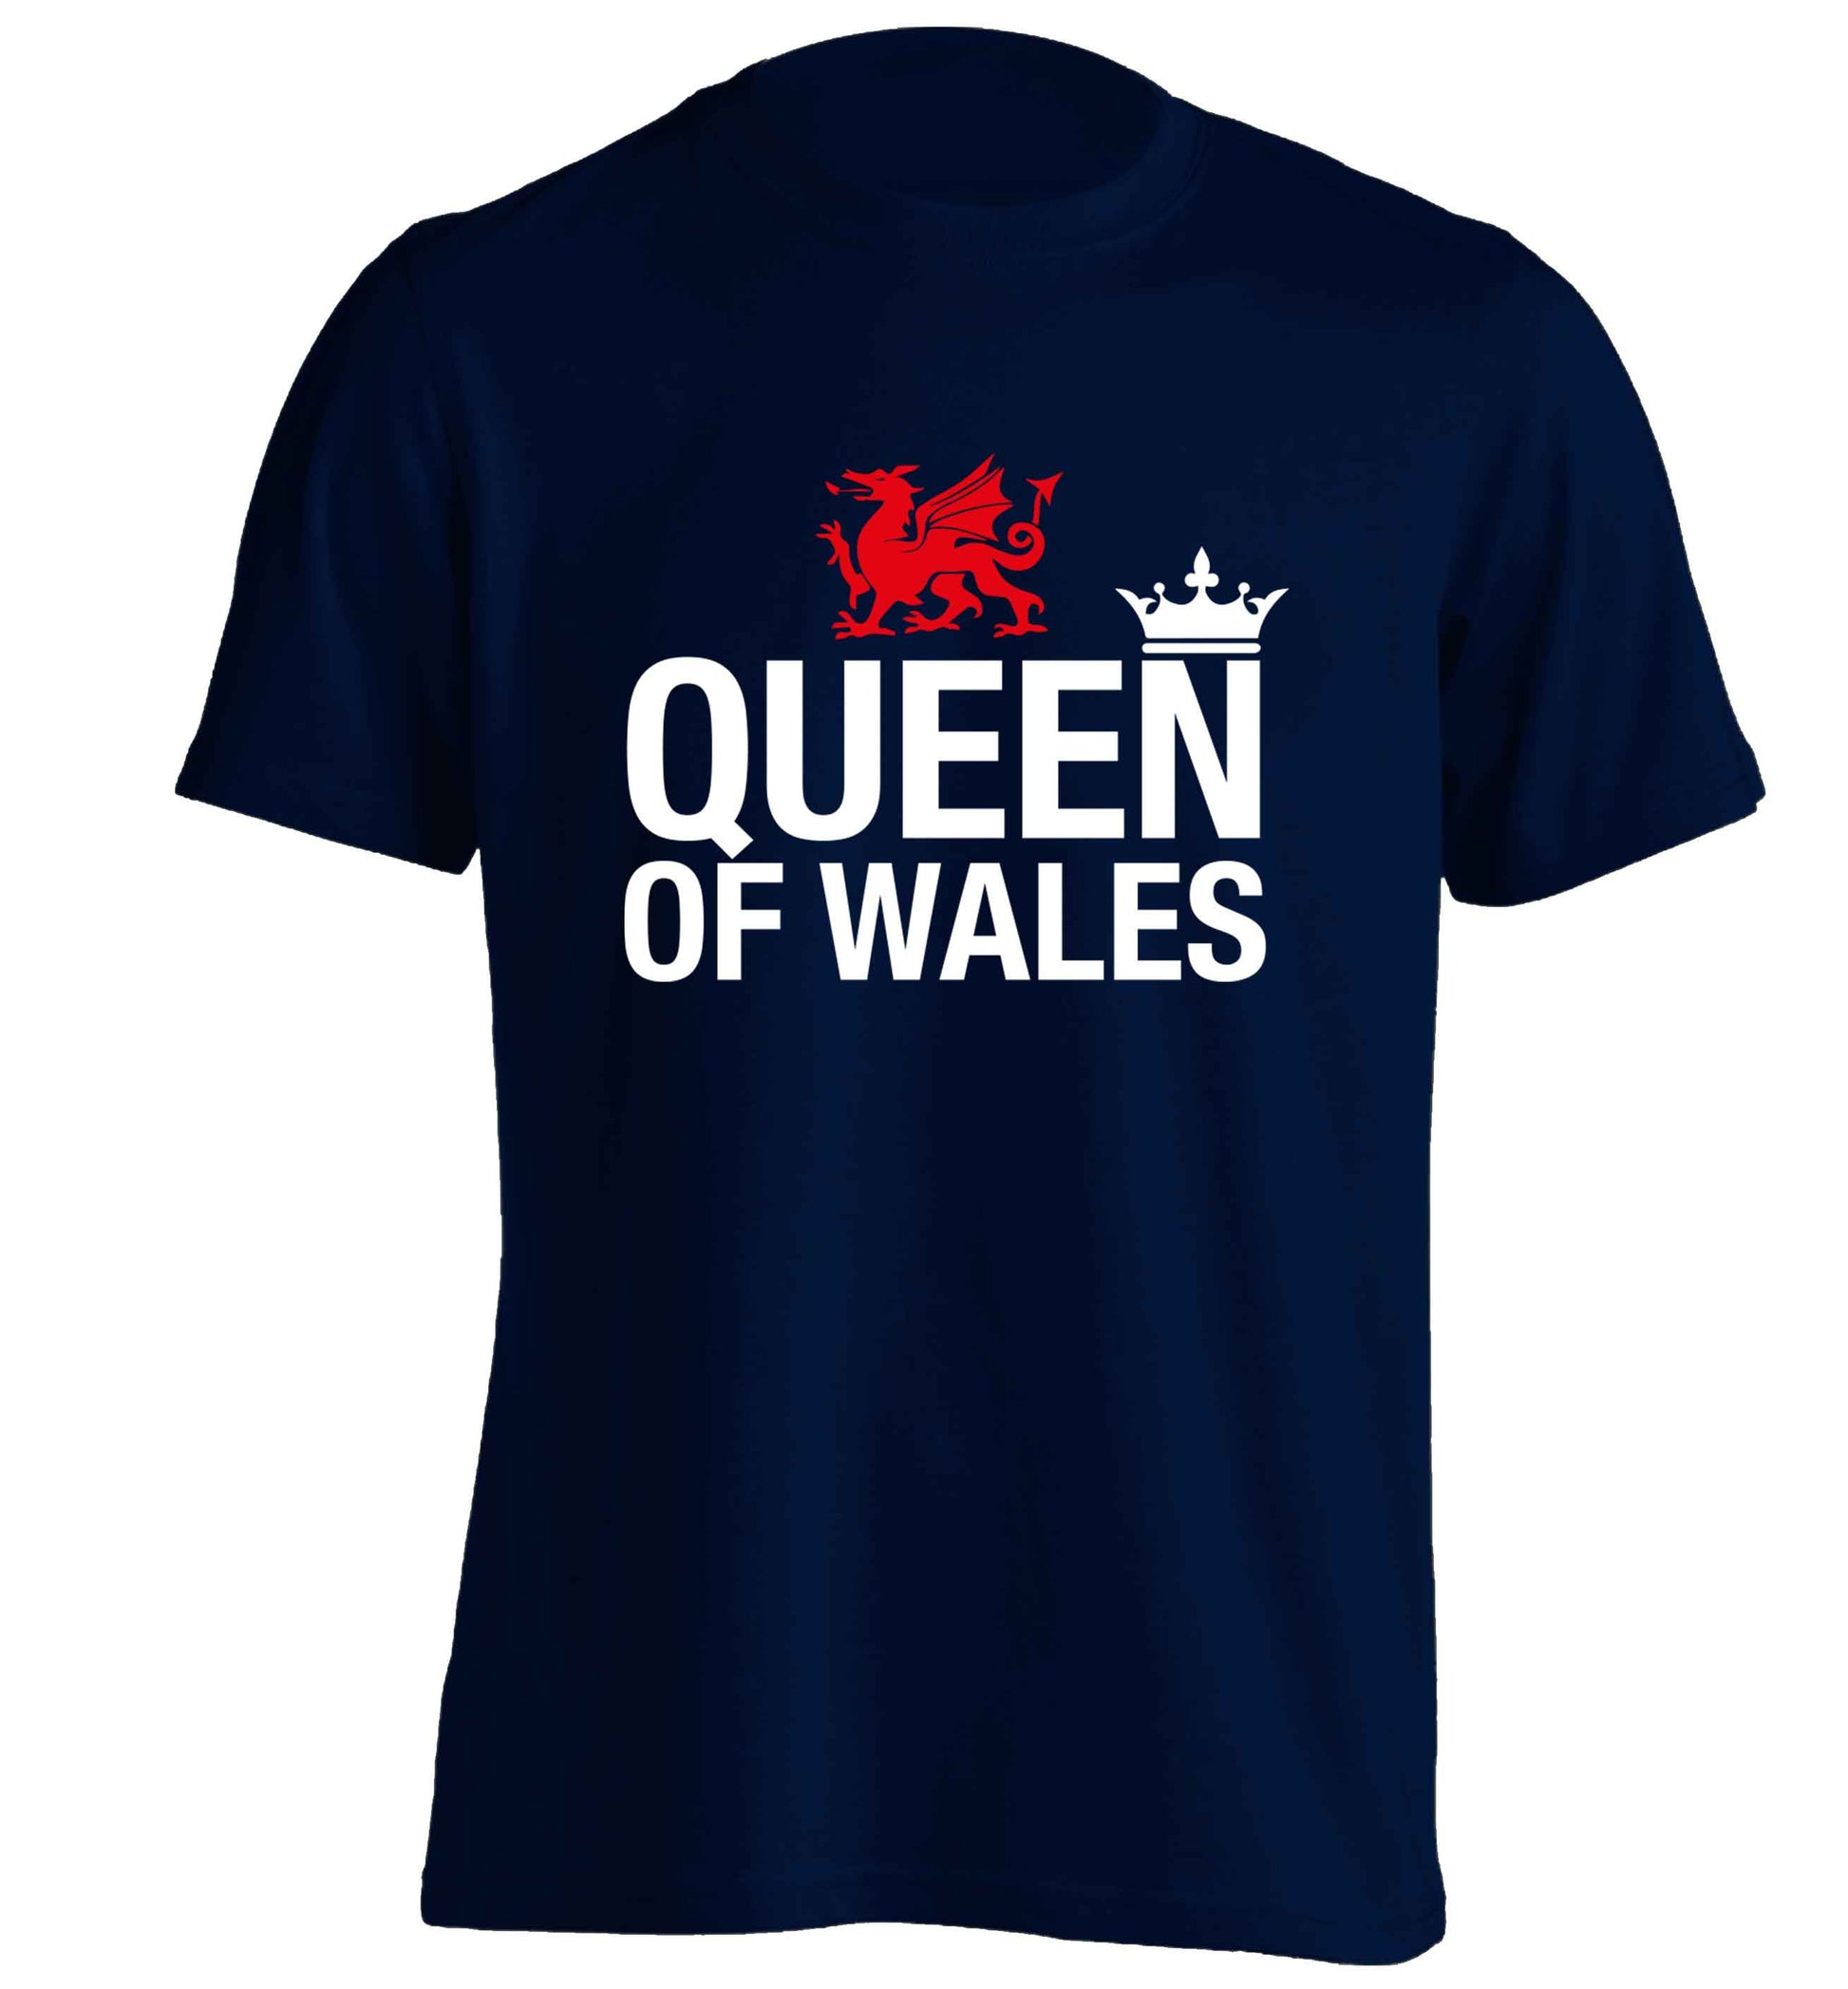 Queen of Wales adults unisex navy Tshirt 2XL